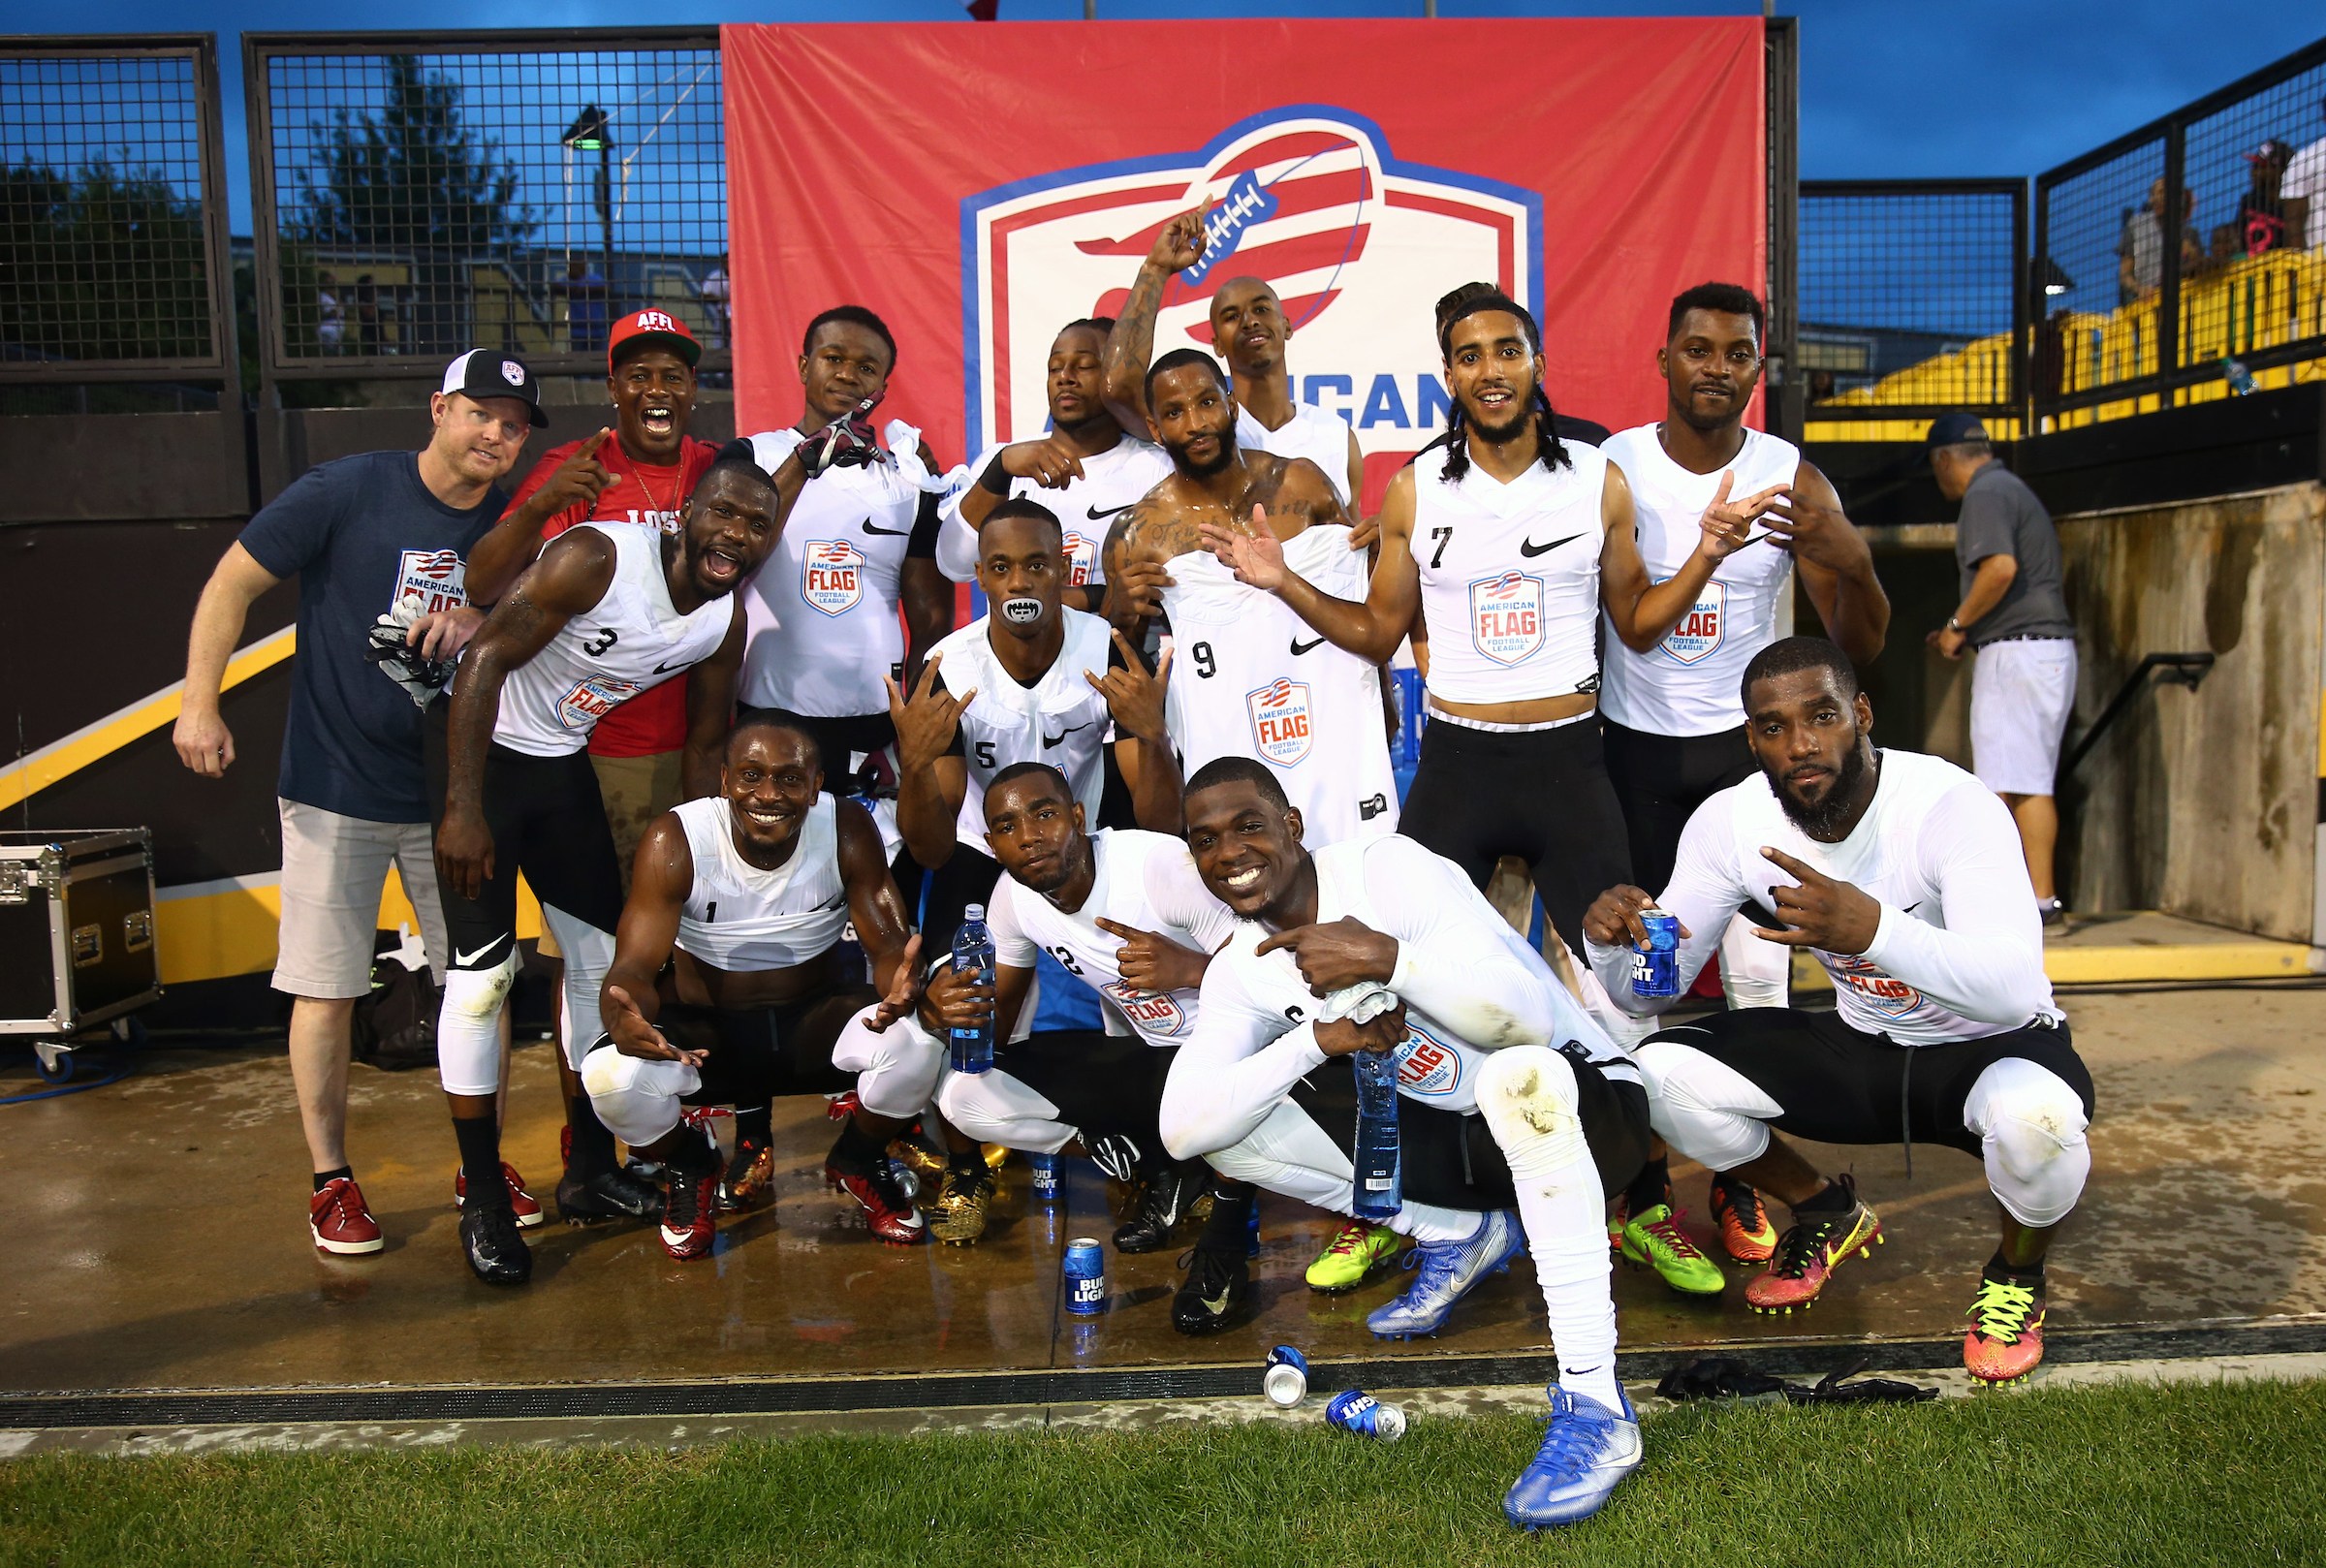 Fighting Cancer celebrates their win over Primetime at the American Flag Football League (AFFL) U.S. Open of Football tournament, Saturday, July 7, 2018 in Kennesaw, Ga. (Kevin D. Liles/AP Images for American Flag Football League)